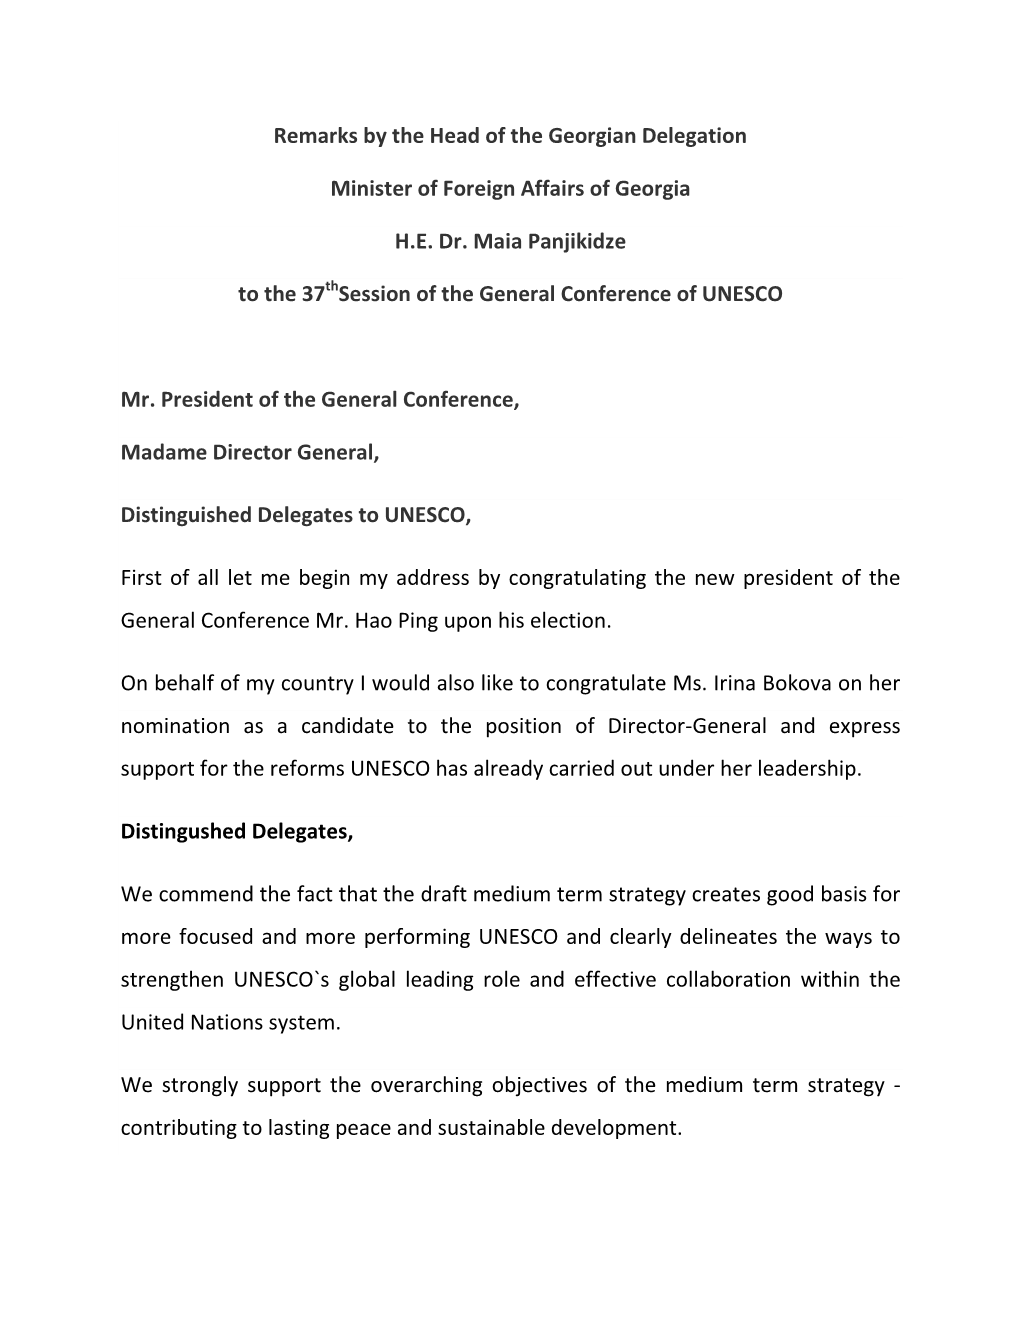 Remarks by the Head of the Georgian Delegation Minister of Foreign